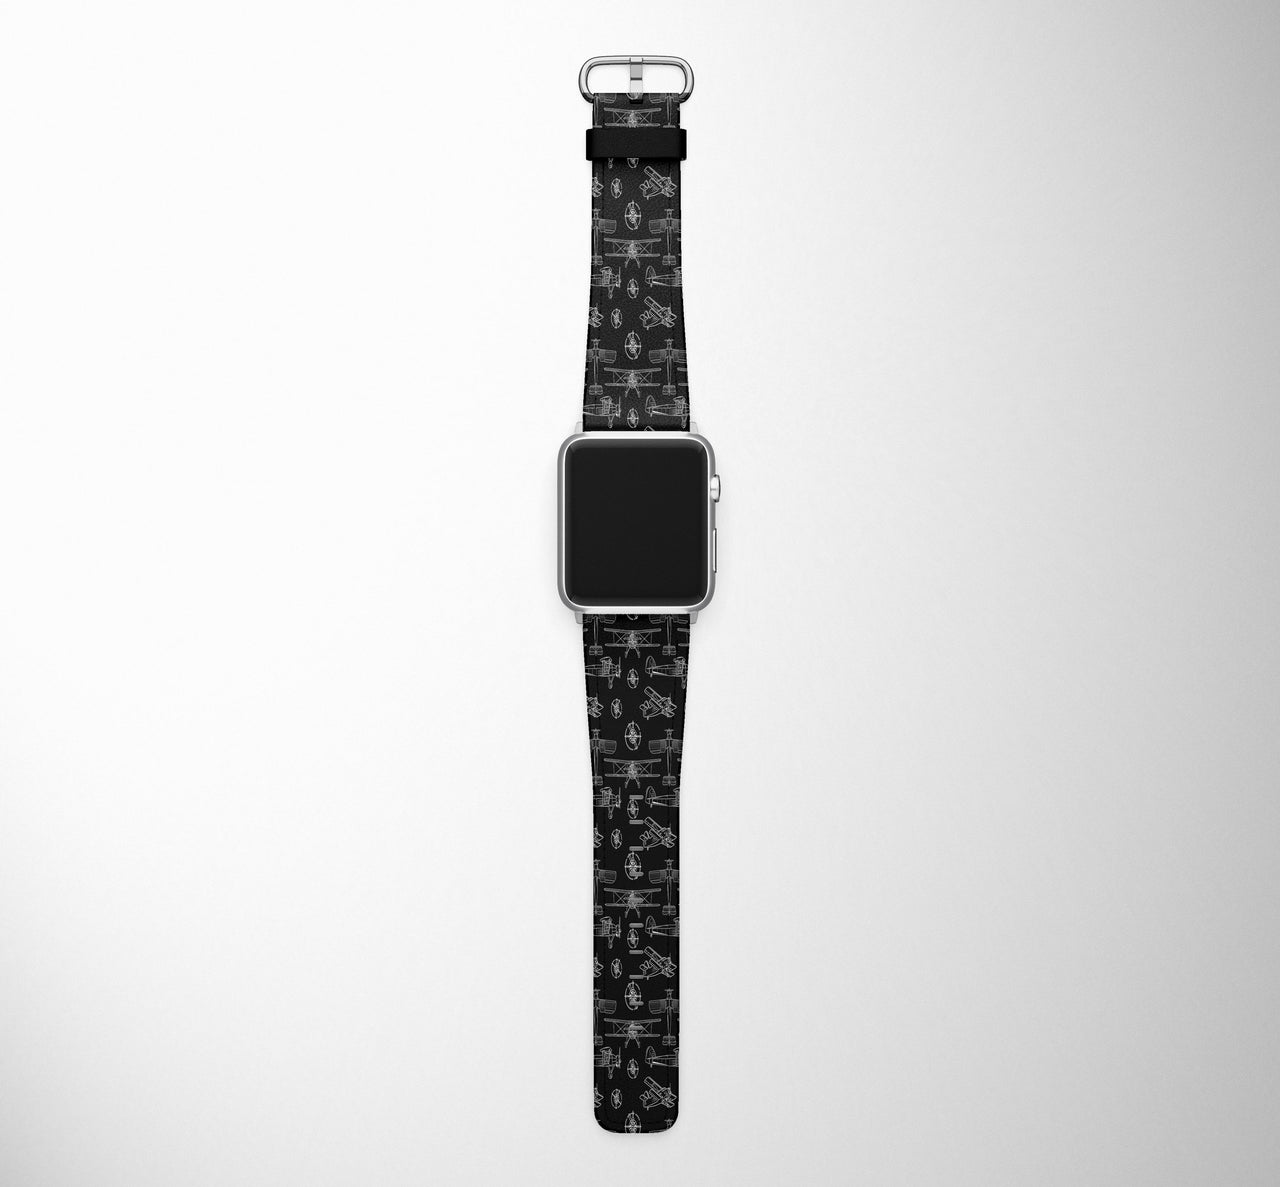 Propeller Lovers Designed Leather Apple Watch Straps